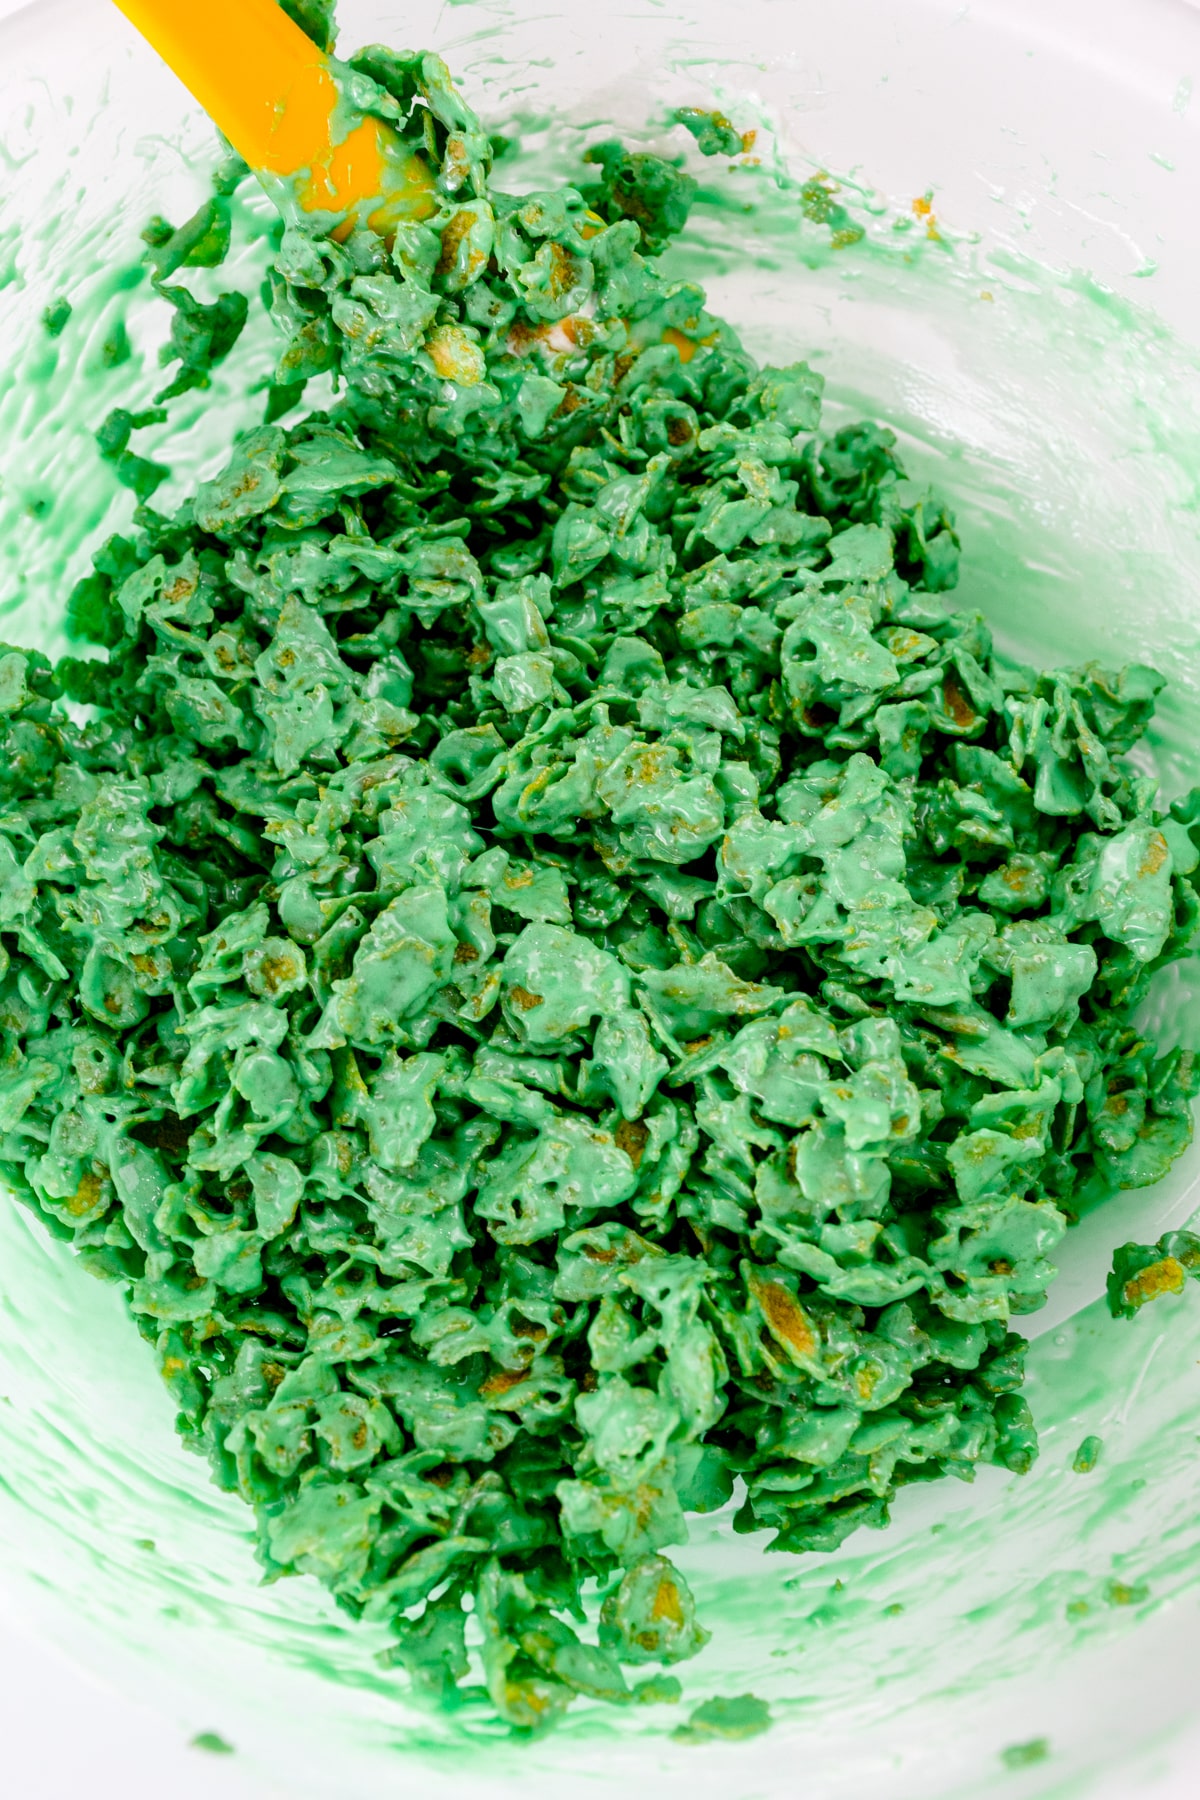 Top view of the cornflake mixture fully colored in green.